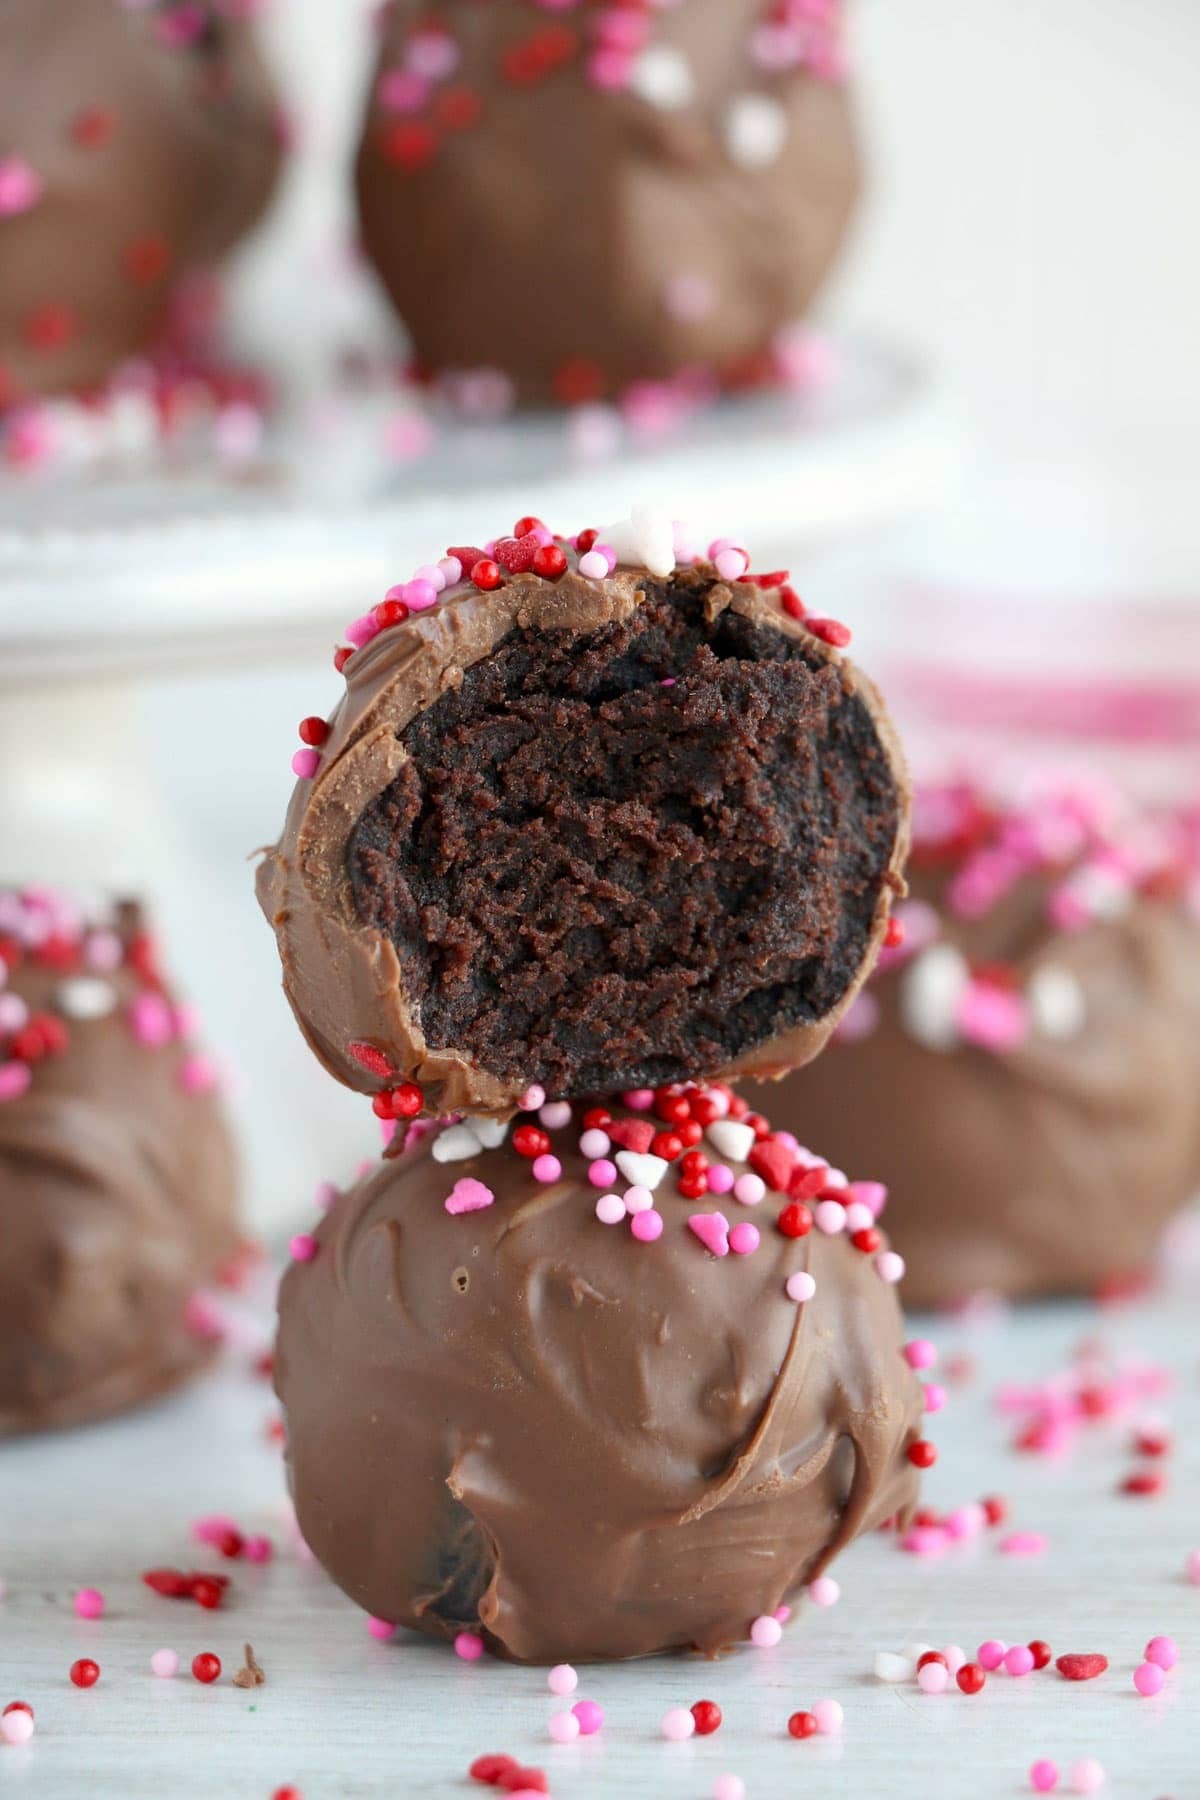 a cake ball, split in half to reveal the insides, stacked on top of another chocolate cake ball